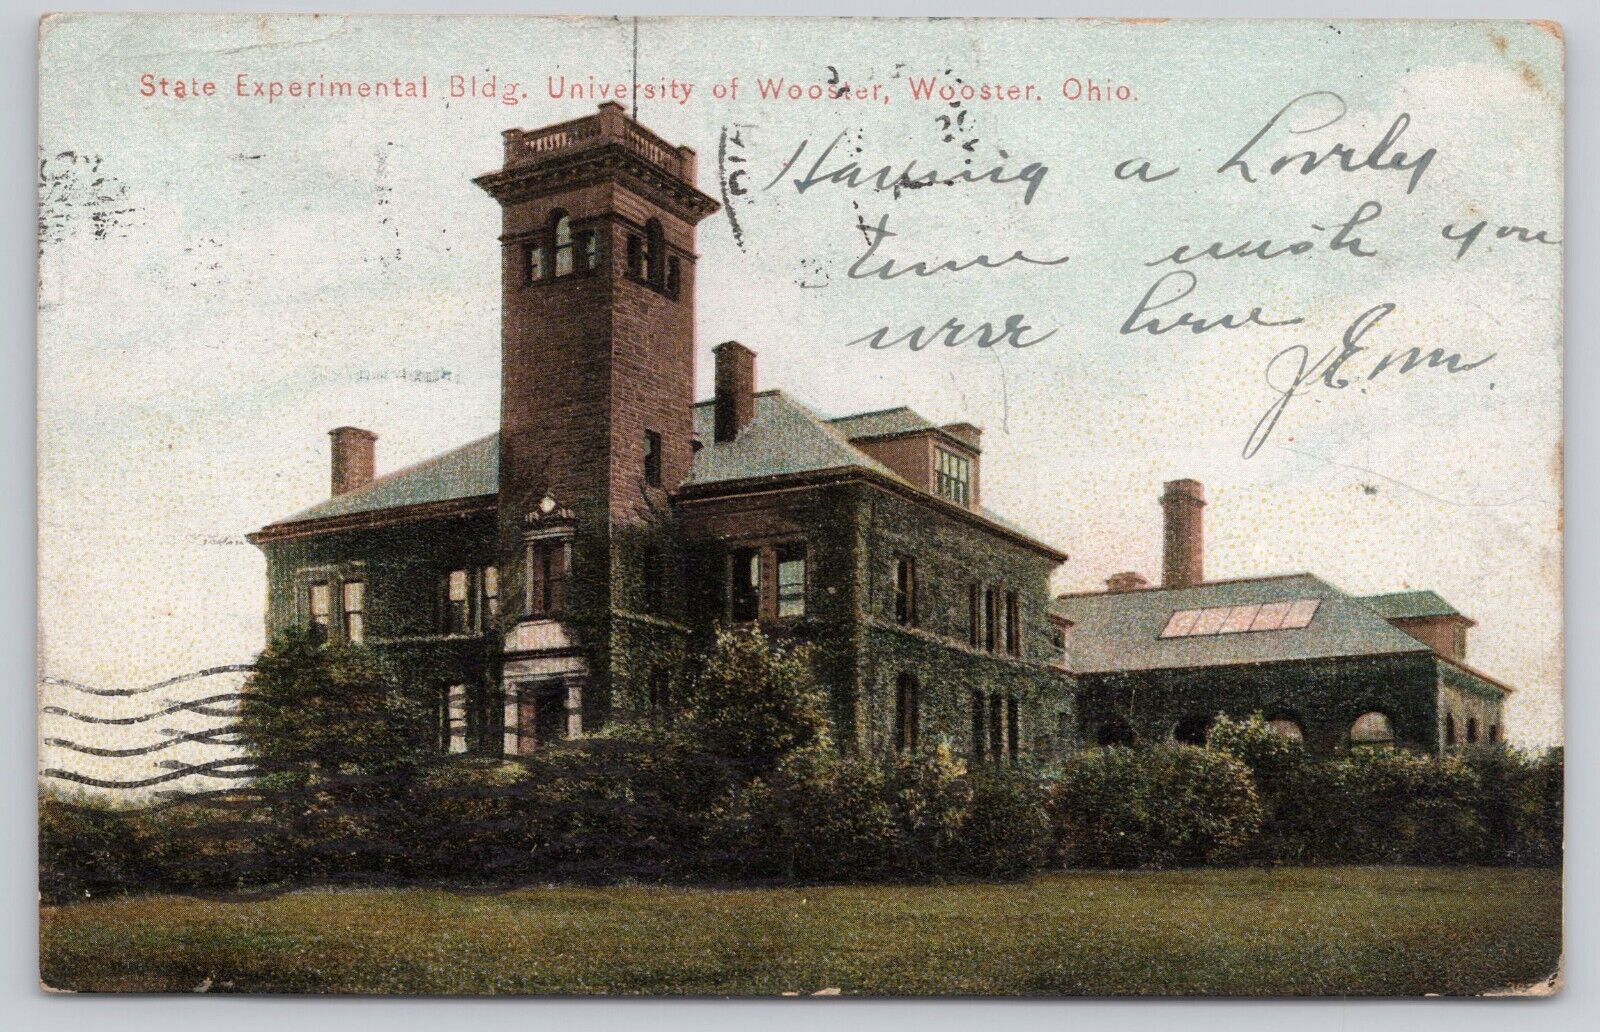 Wooster Ohio State Experimental Building University of Wooster Antique Postcard